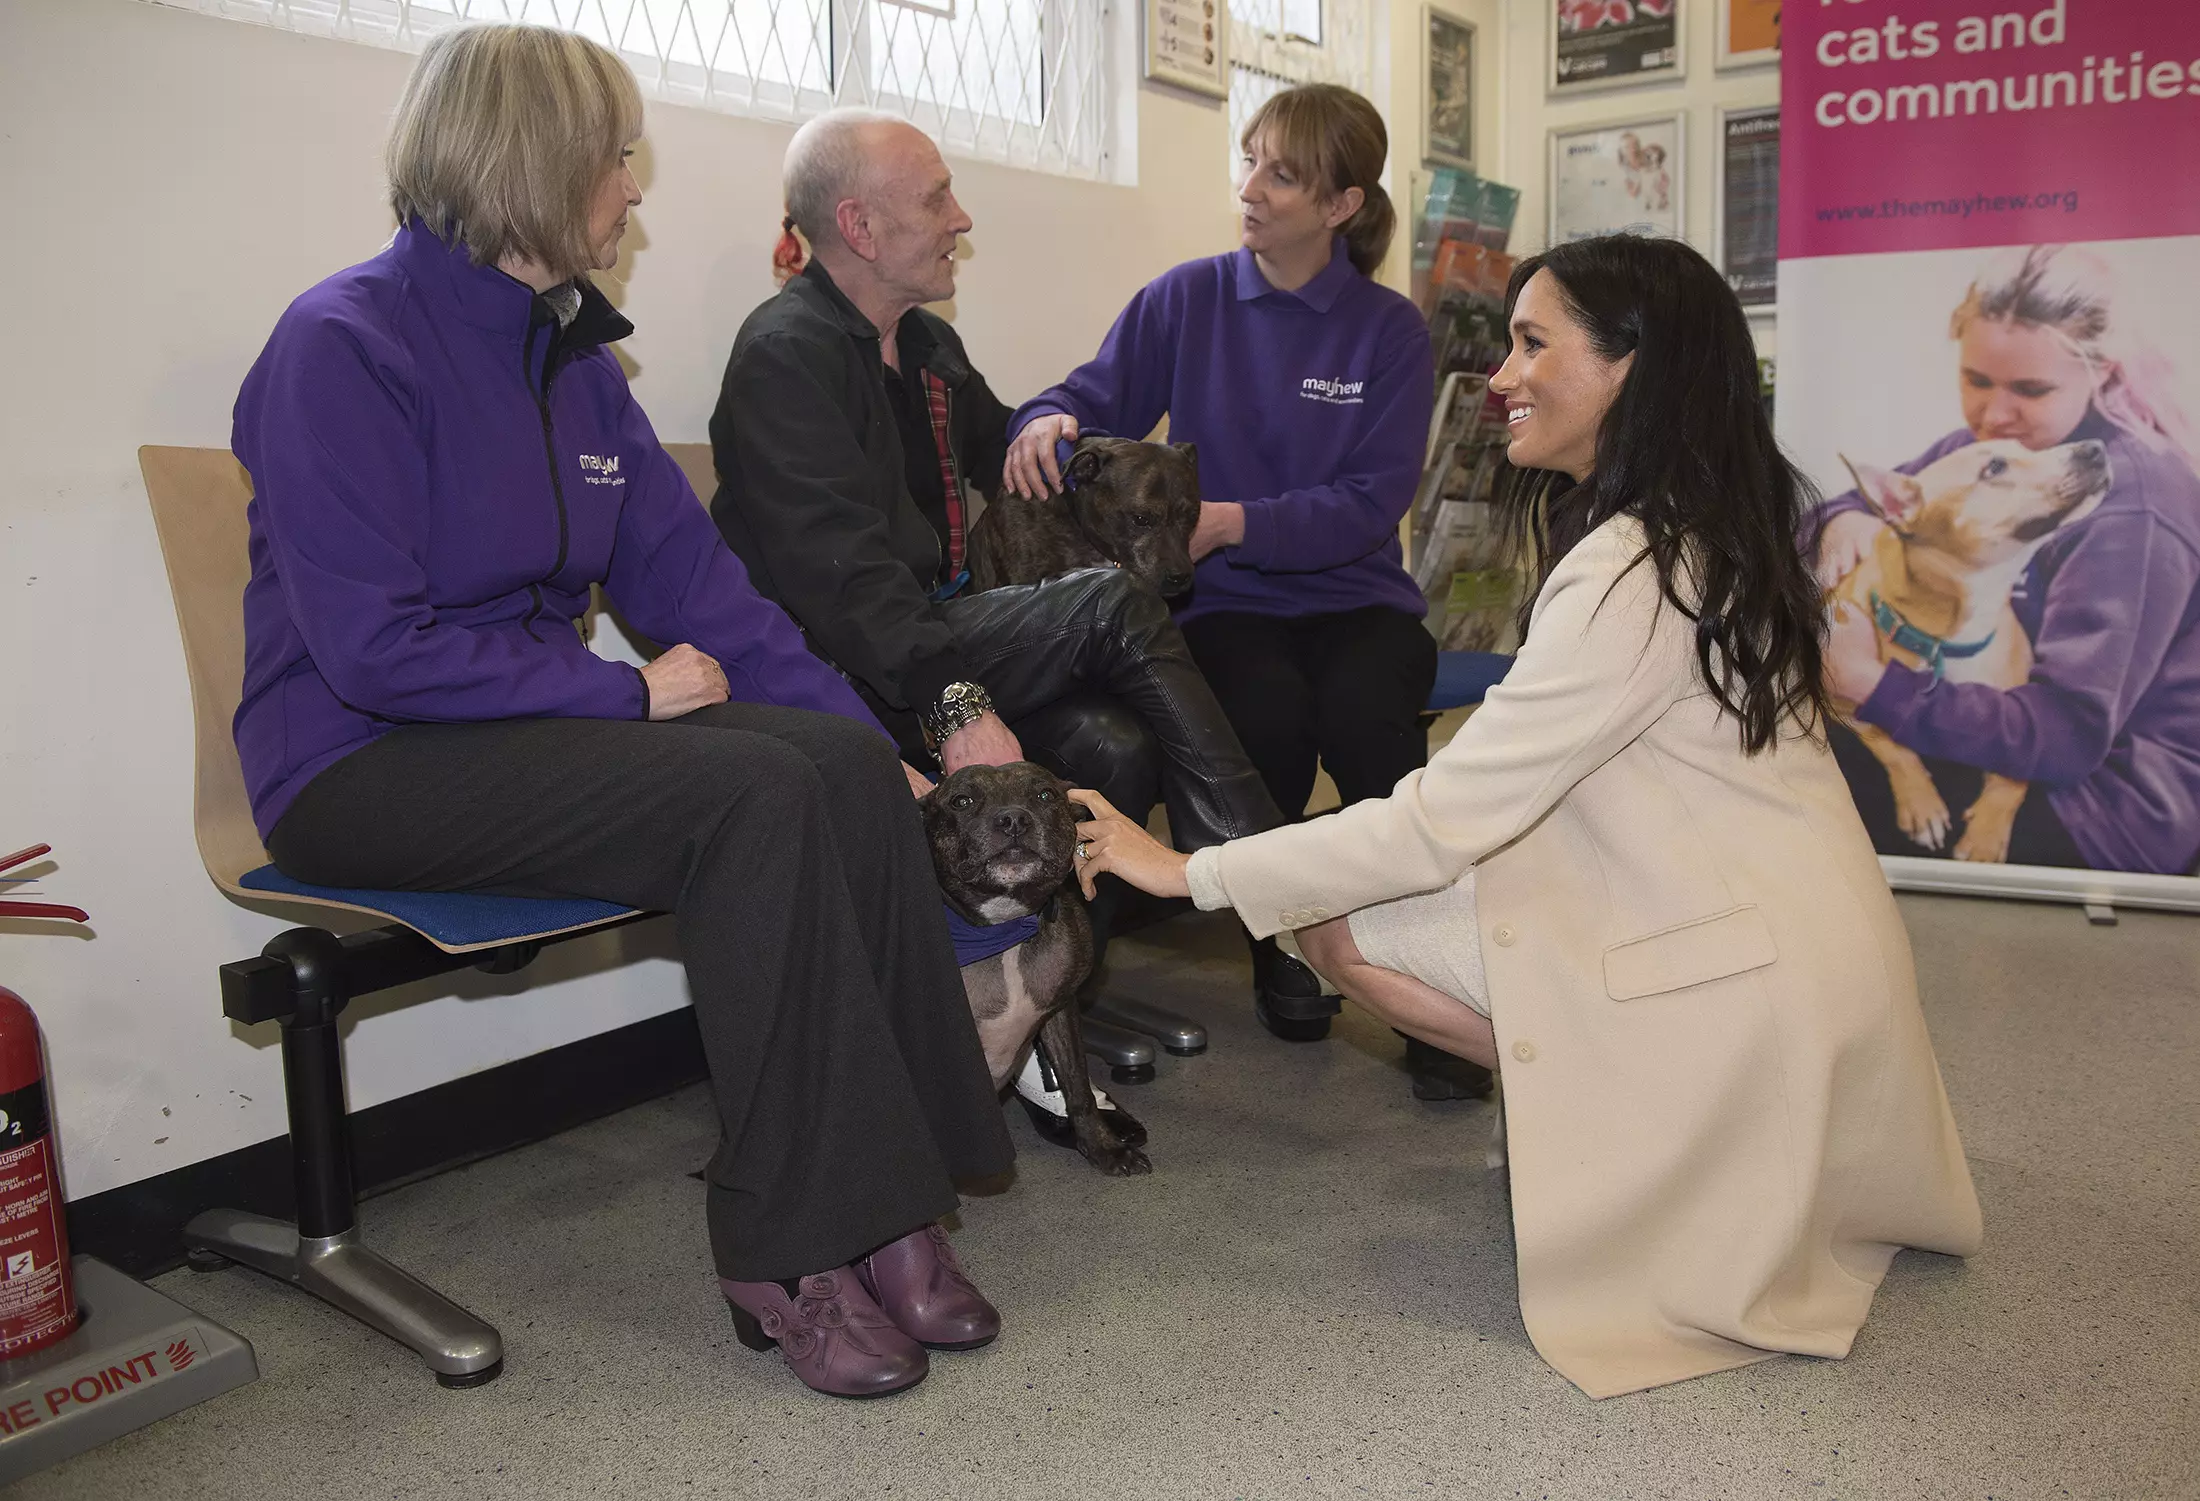 The Duchess of Sussex is a patron of the animal charity.